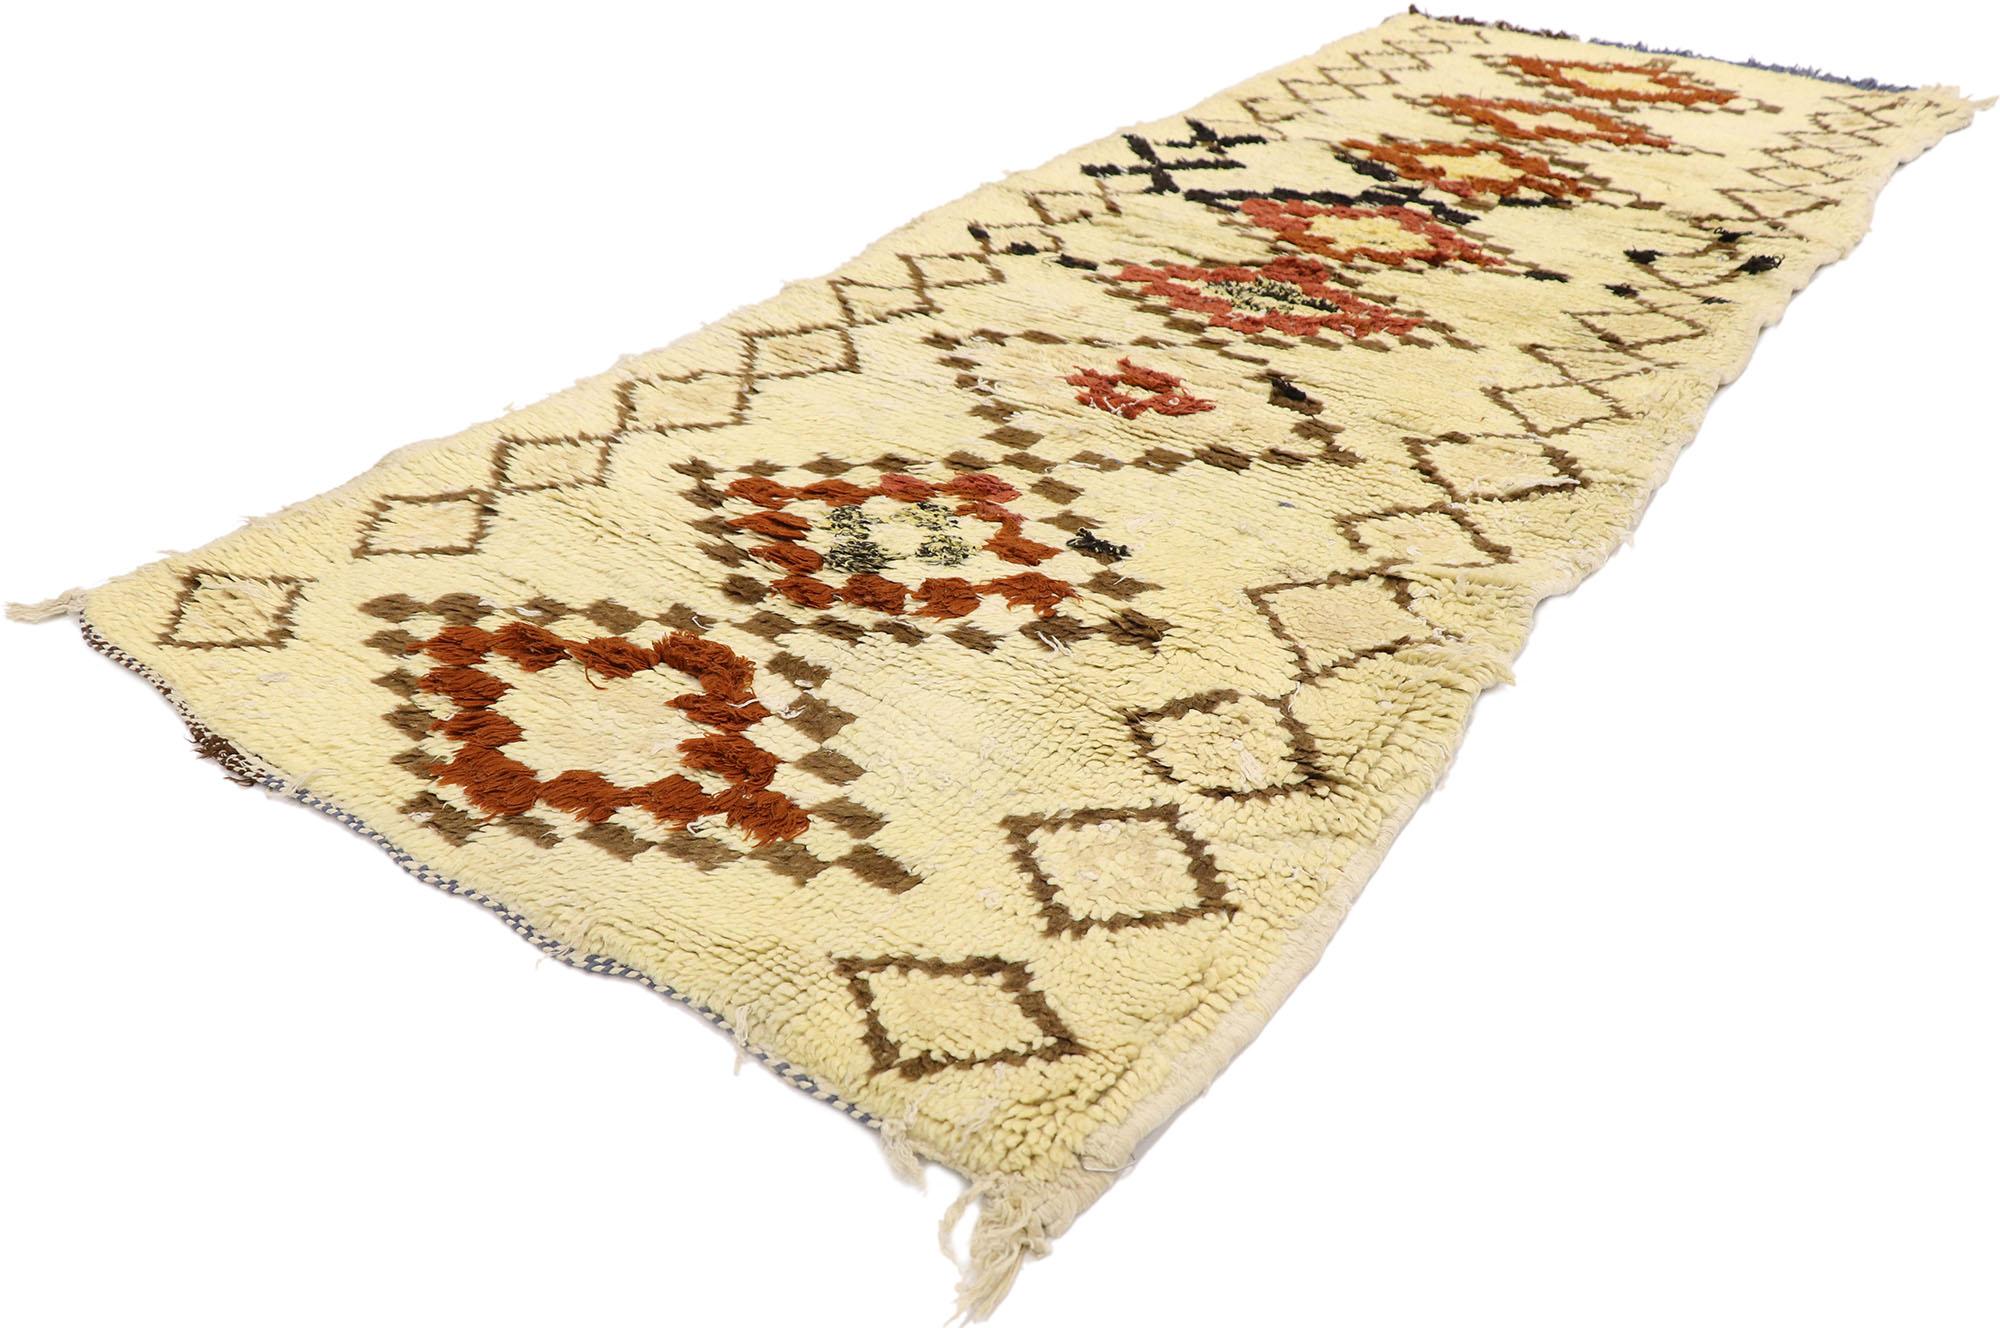 21561 Vintage Berber Moroccan Azilal rug with Tribal Style 02'06 x 06'08. Showcasing a bold expressive design, incredible detail and texture, this hand knotted wool vintage Berber Moroccan Azilal rug is a captivating vision of woven beauty. The